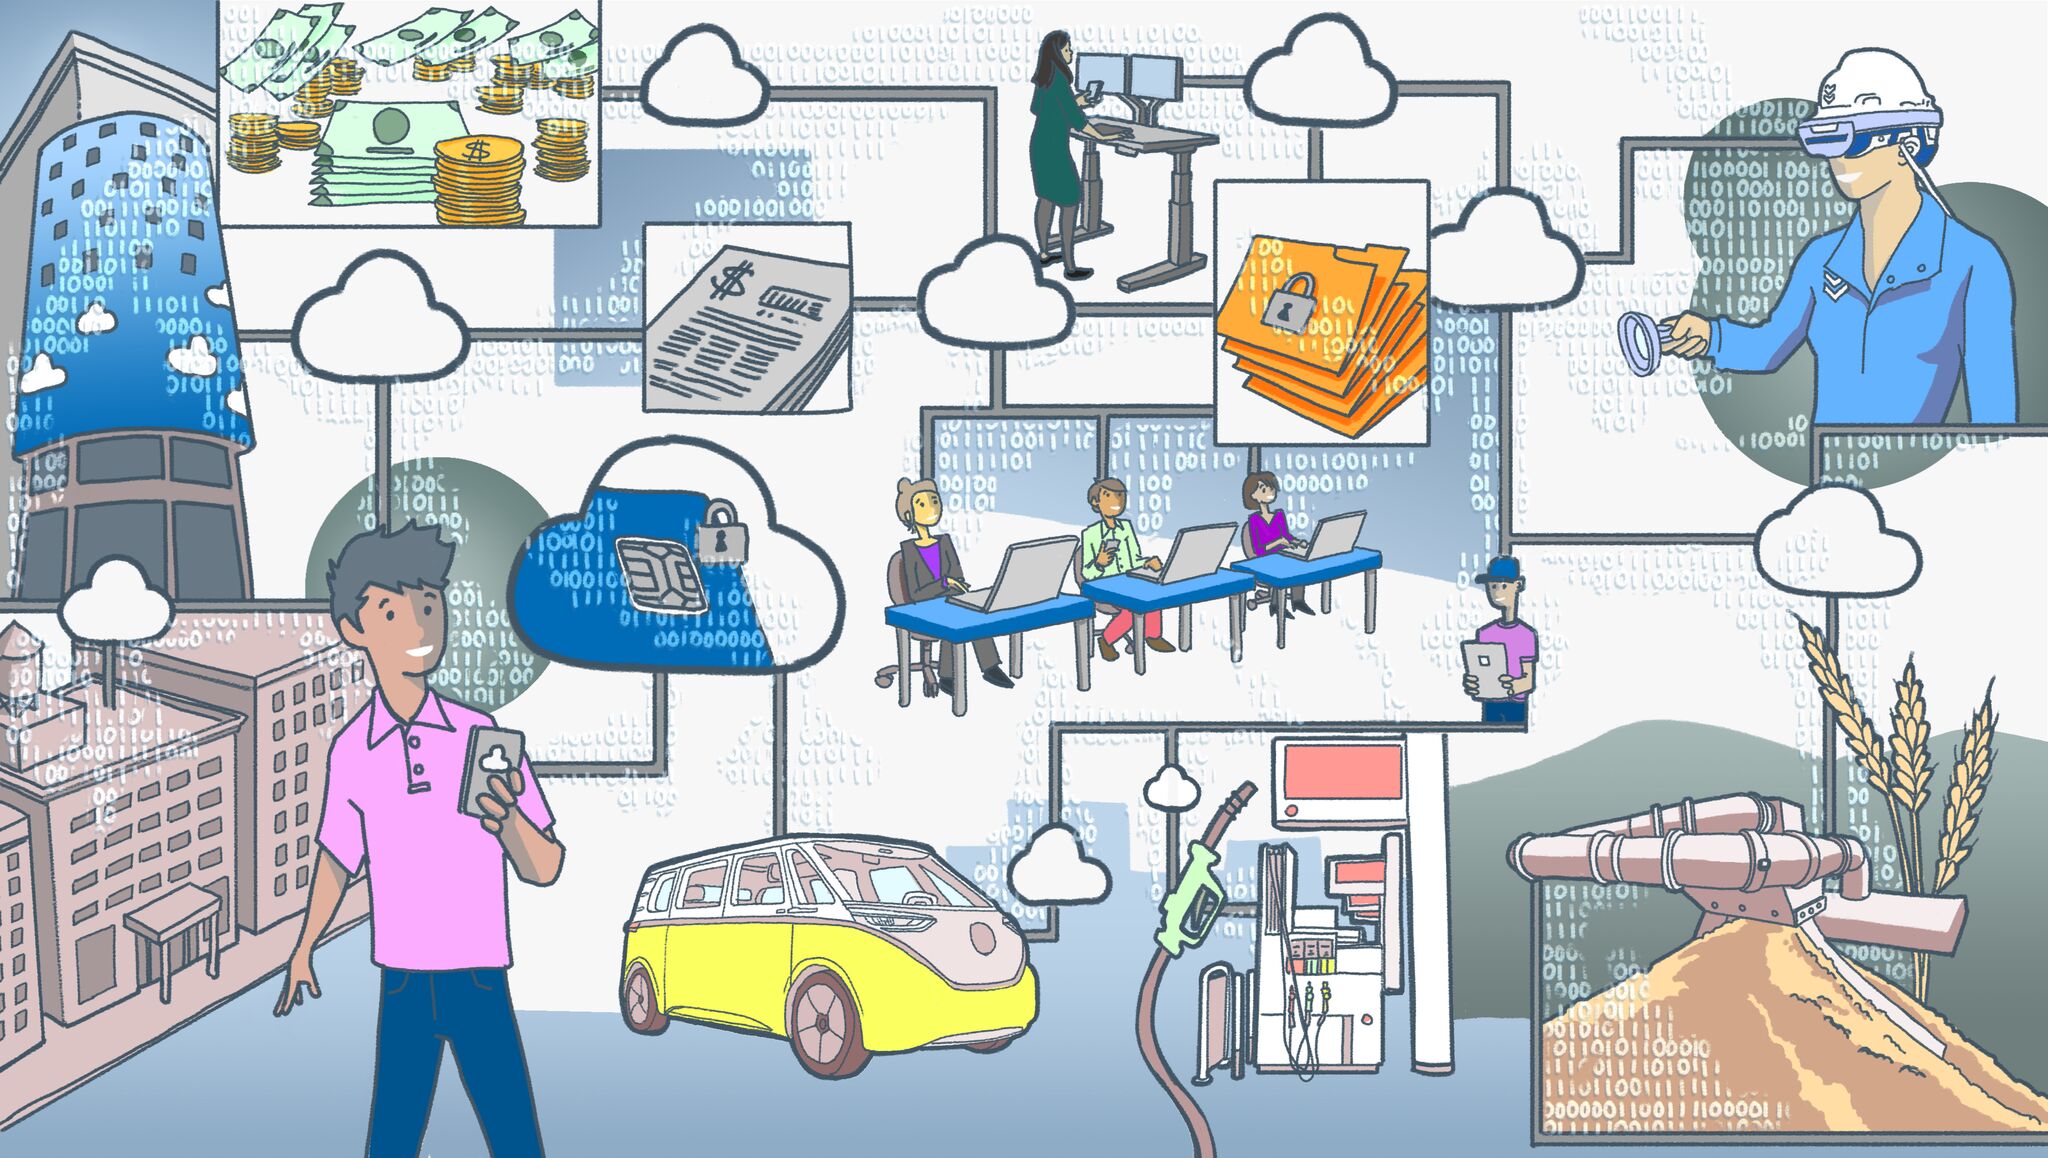 Illustration of various industries embracing technologies to drive innovation, including payment processing, connected cars, ride-hailing apps and facility management.